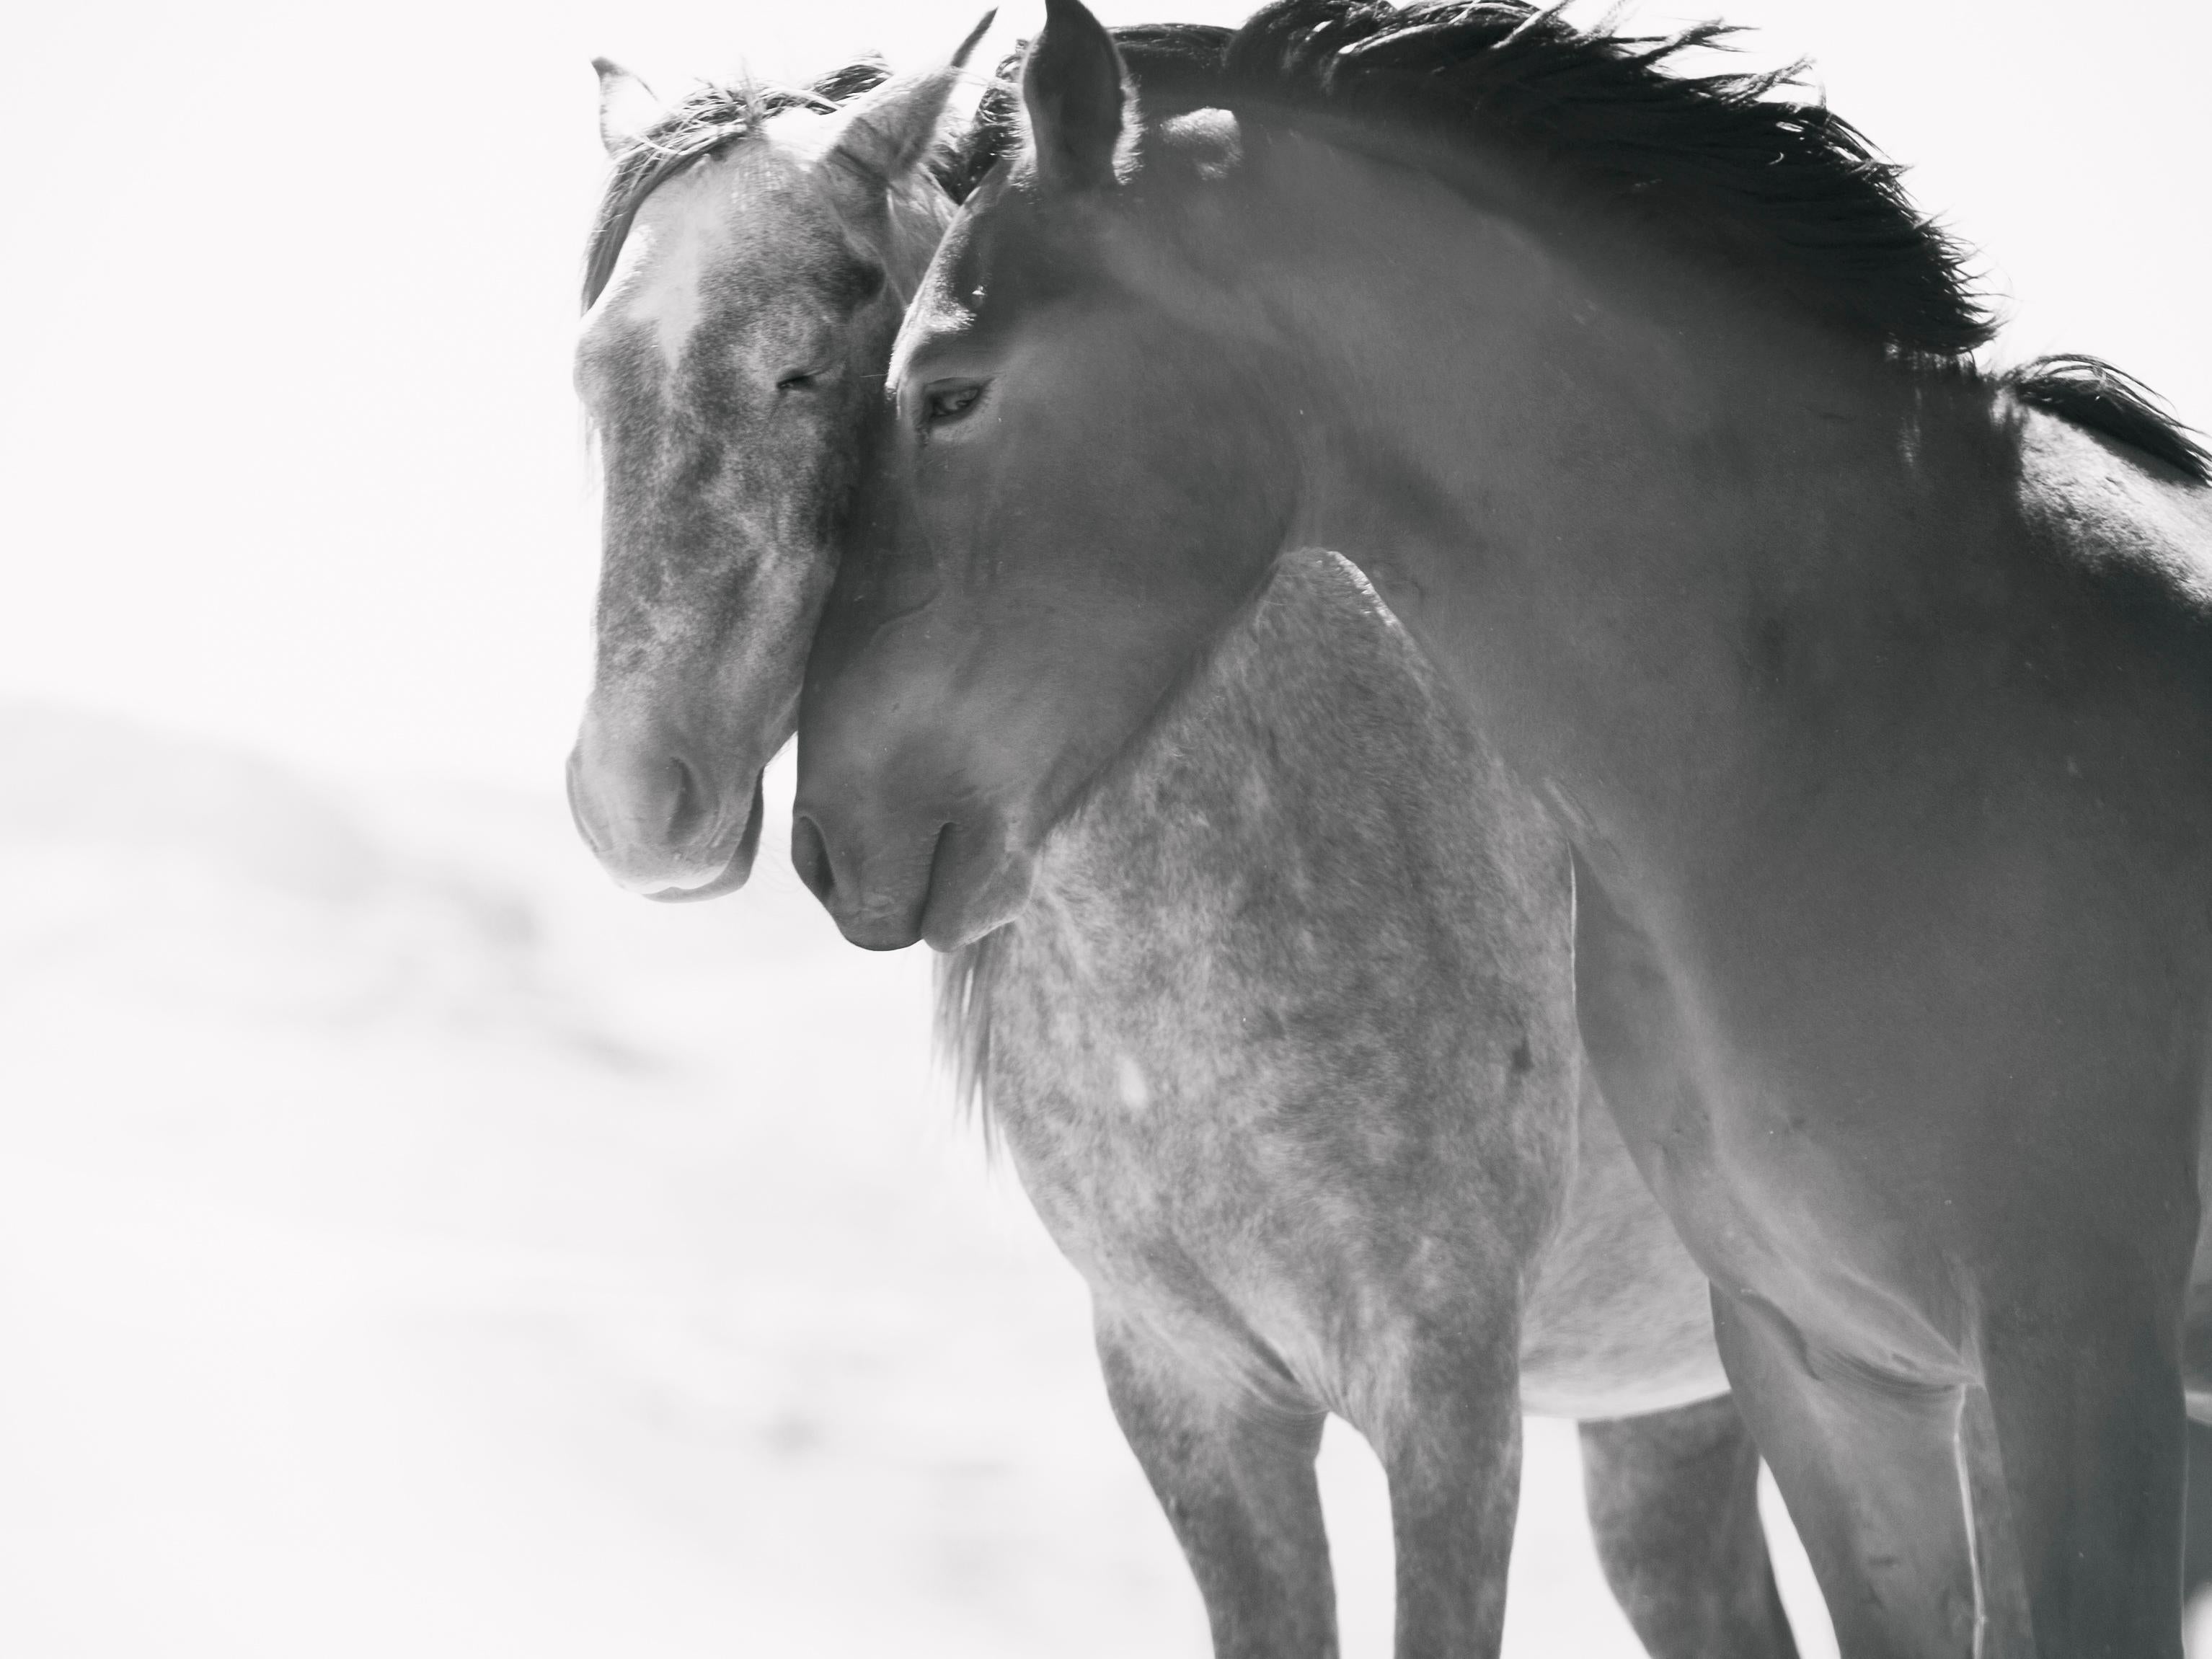 Shane Russeck Black and White Photograph - 40x60 Photography of Wild Horses Mustangs "Soulmates"  Unsigned Test Print